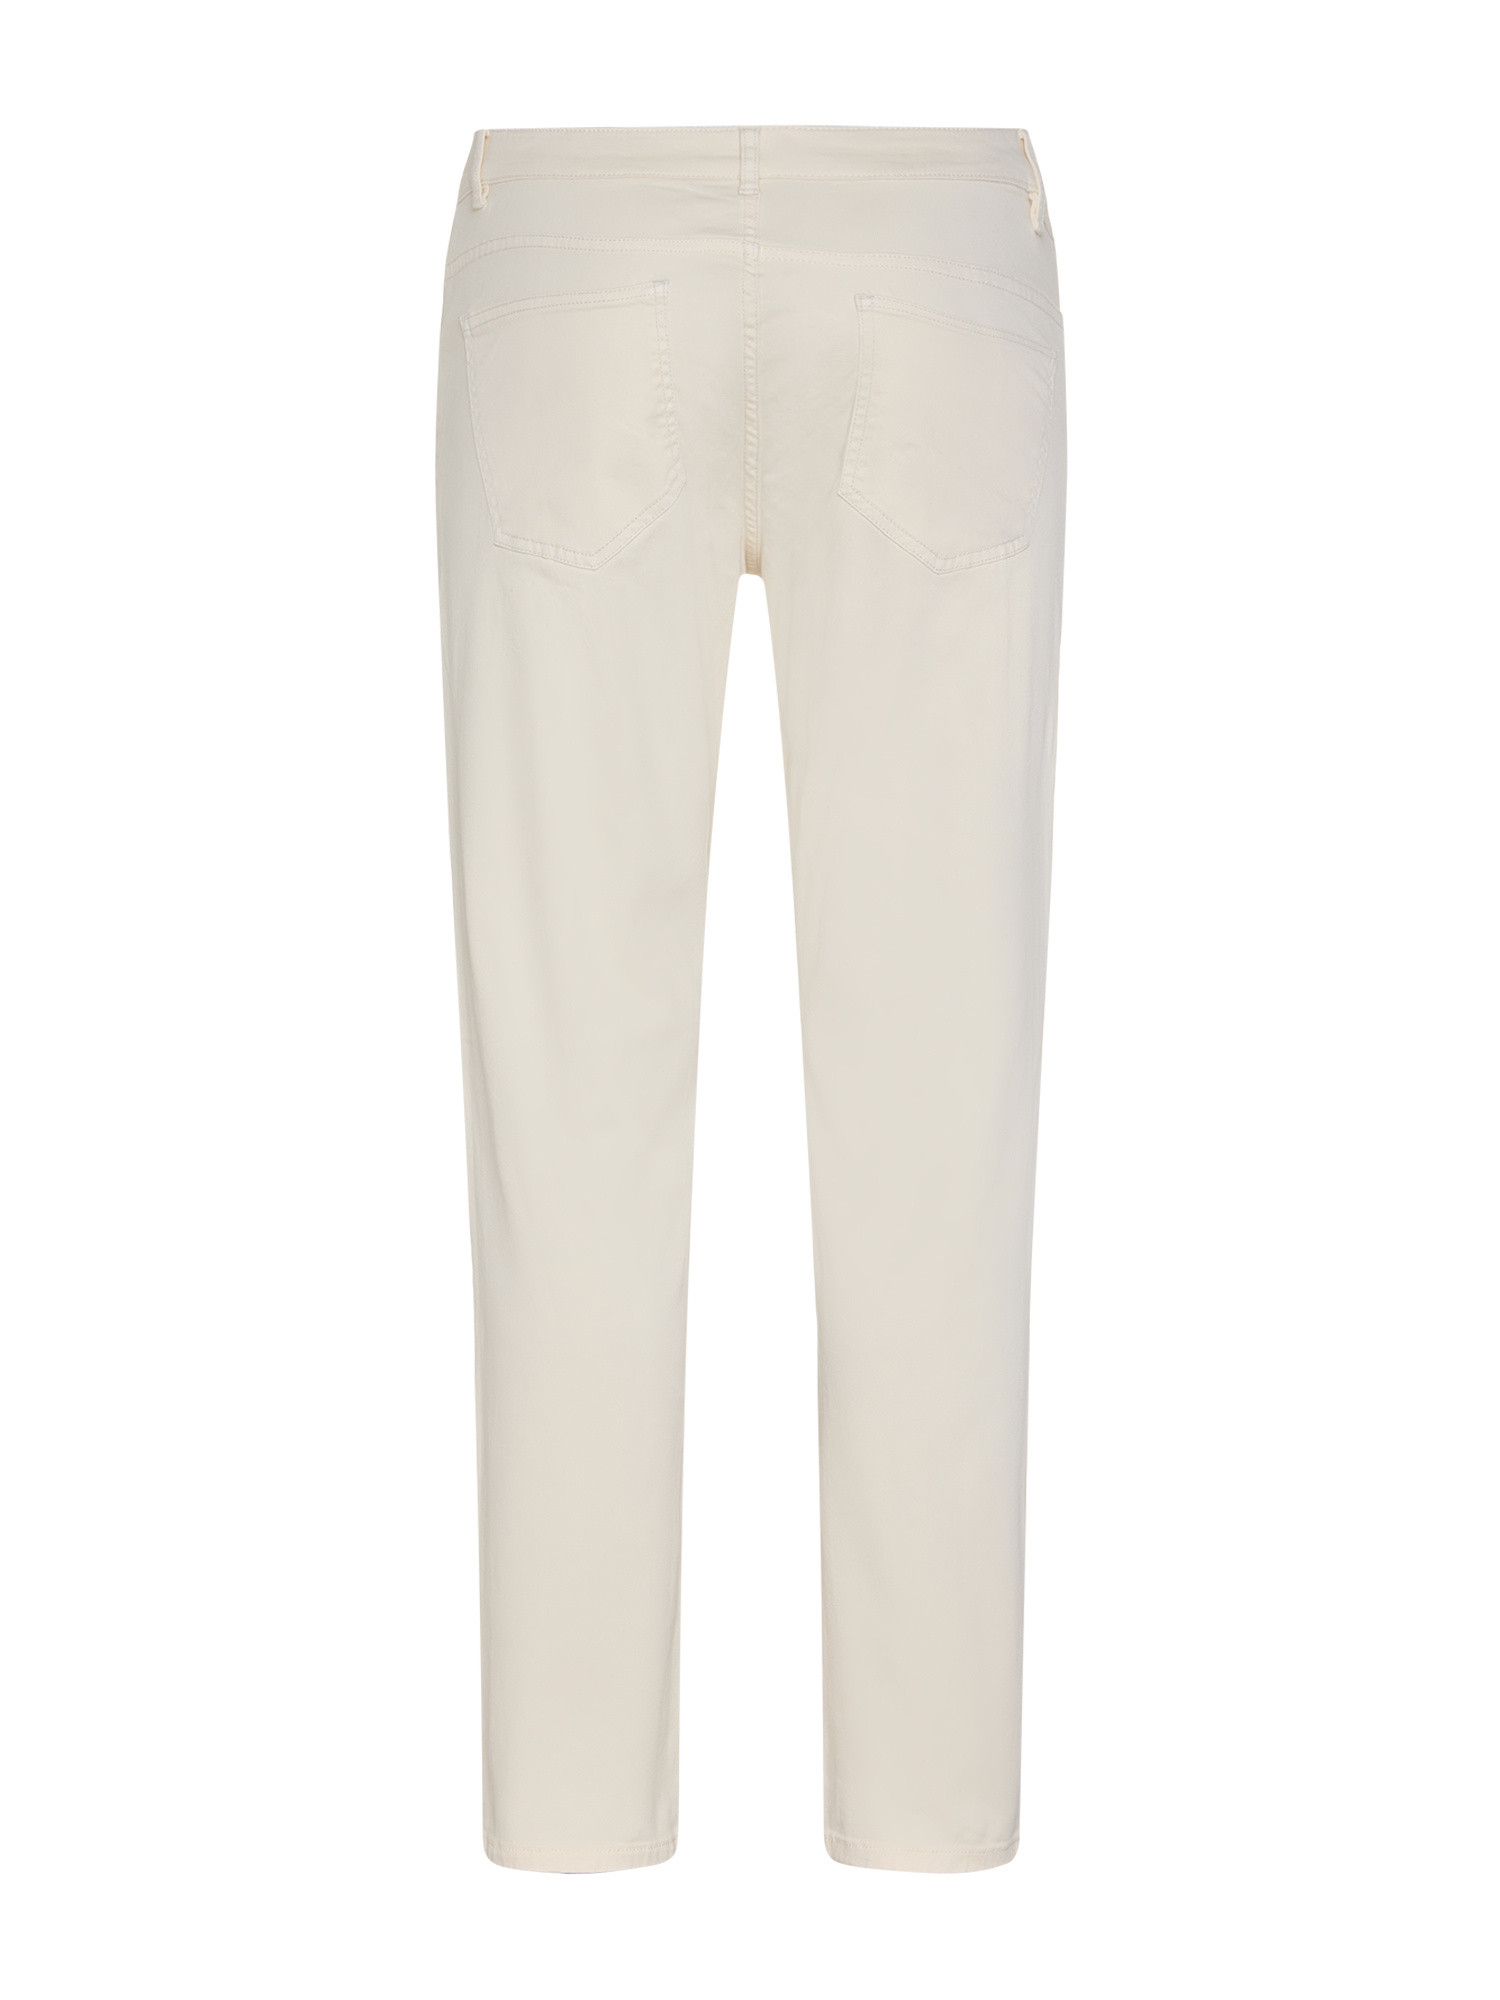 JCT - Slim fit five pocket trousers, White Cream, large image number 1